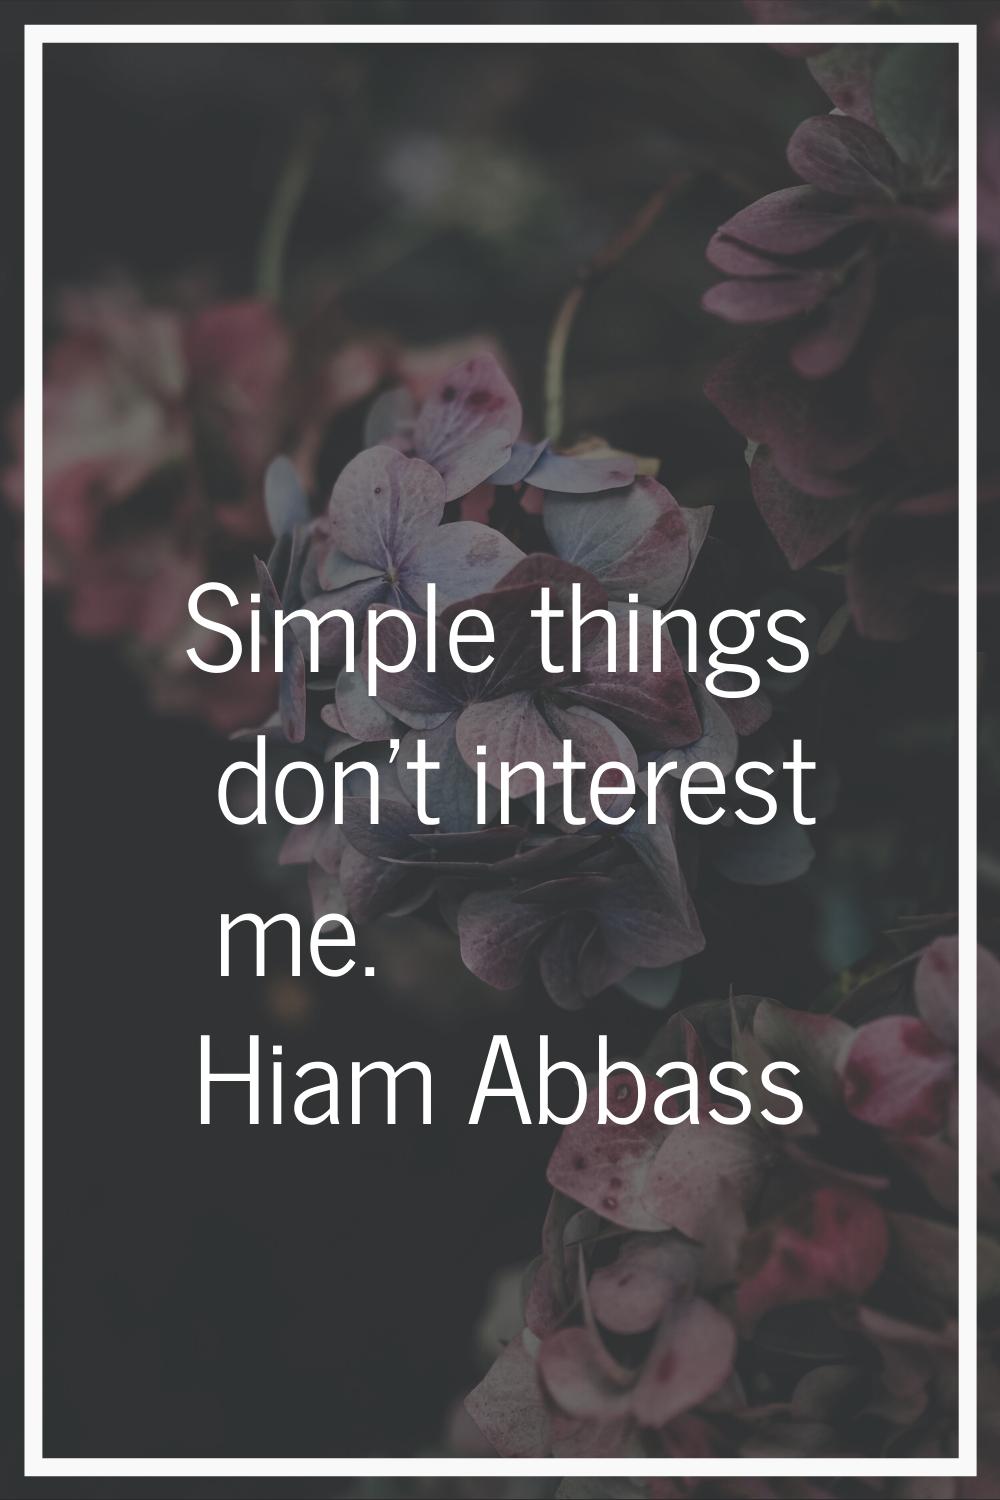 Simple things don't interest me.